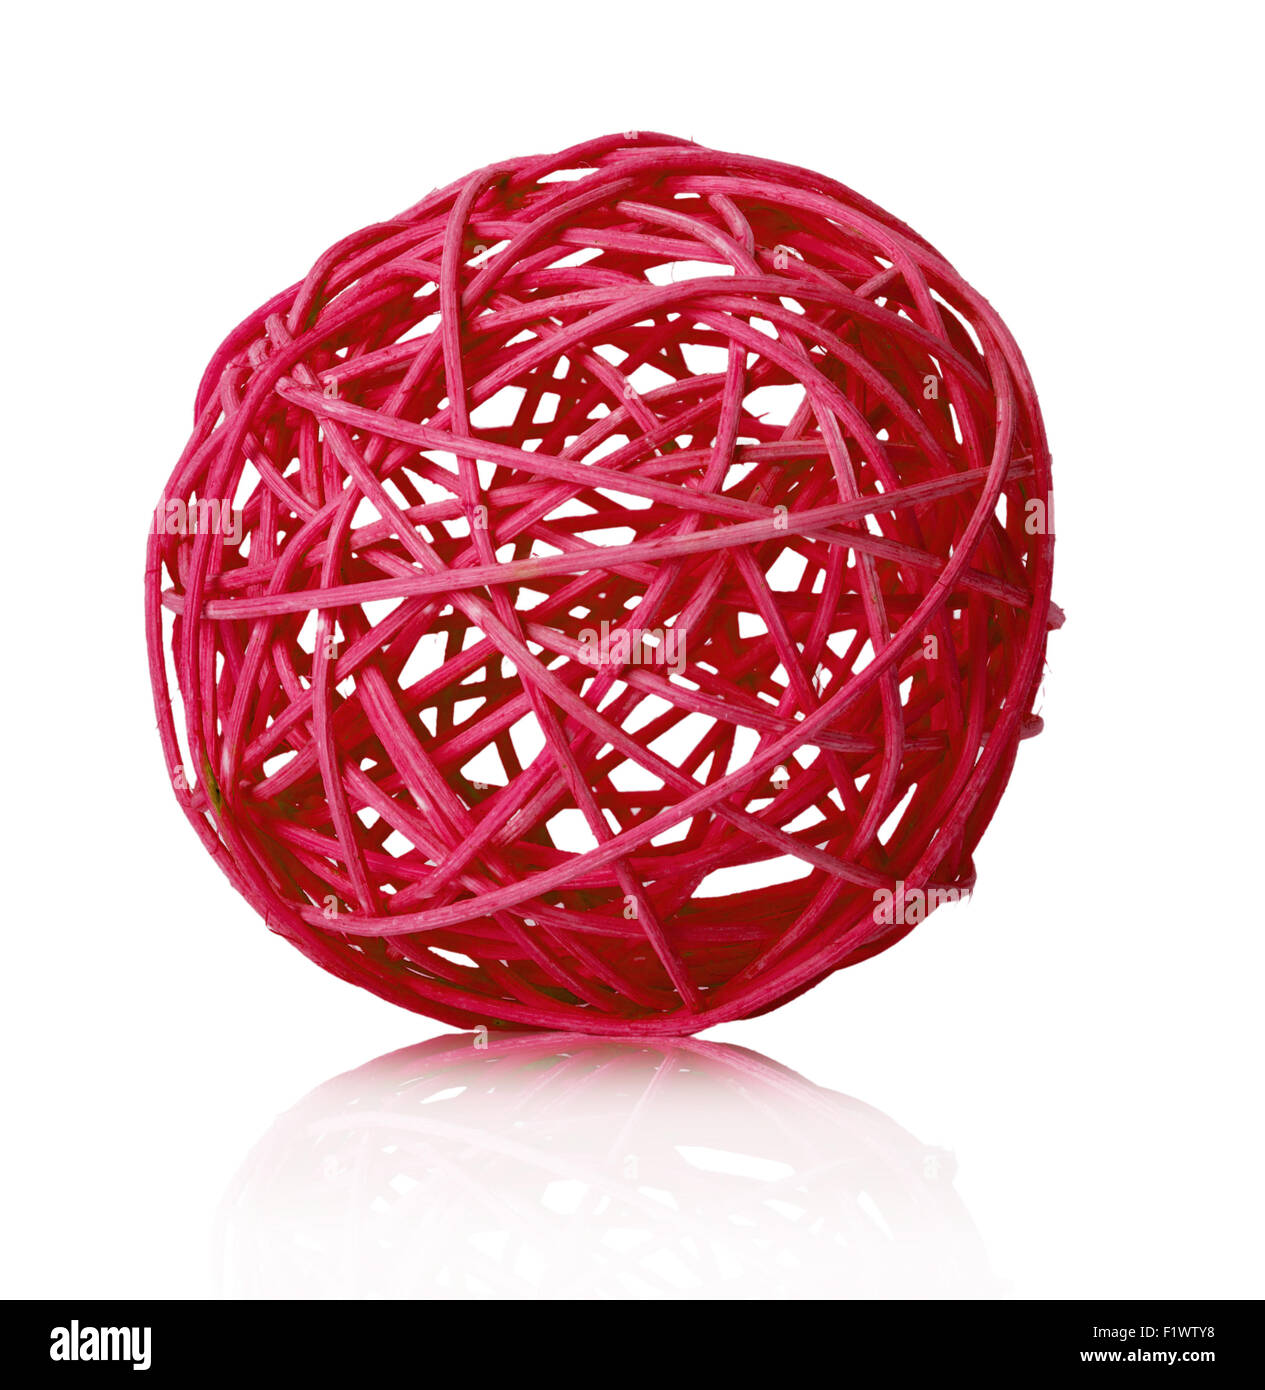 red ball of yarn on the white background. Stock Photo